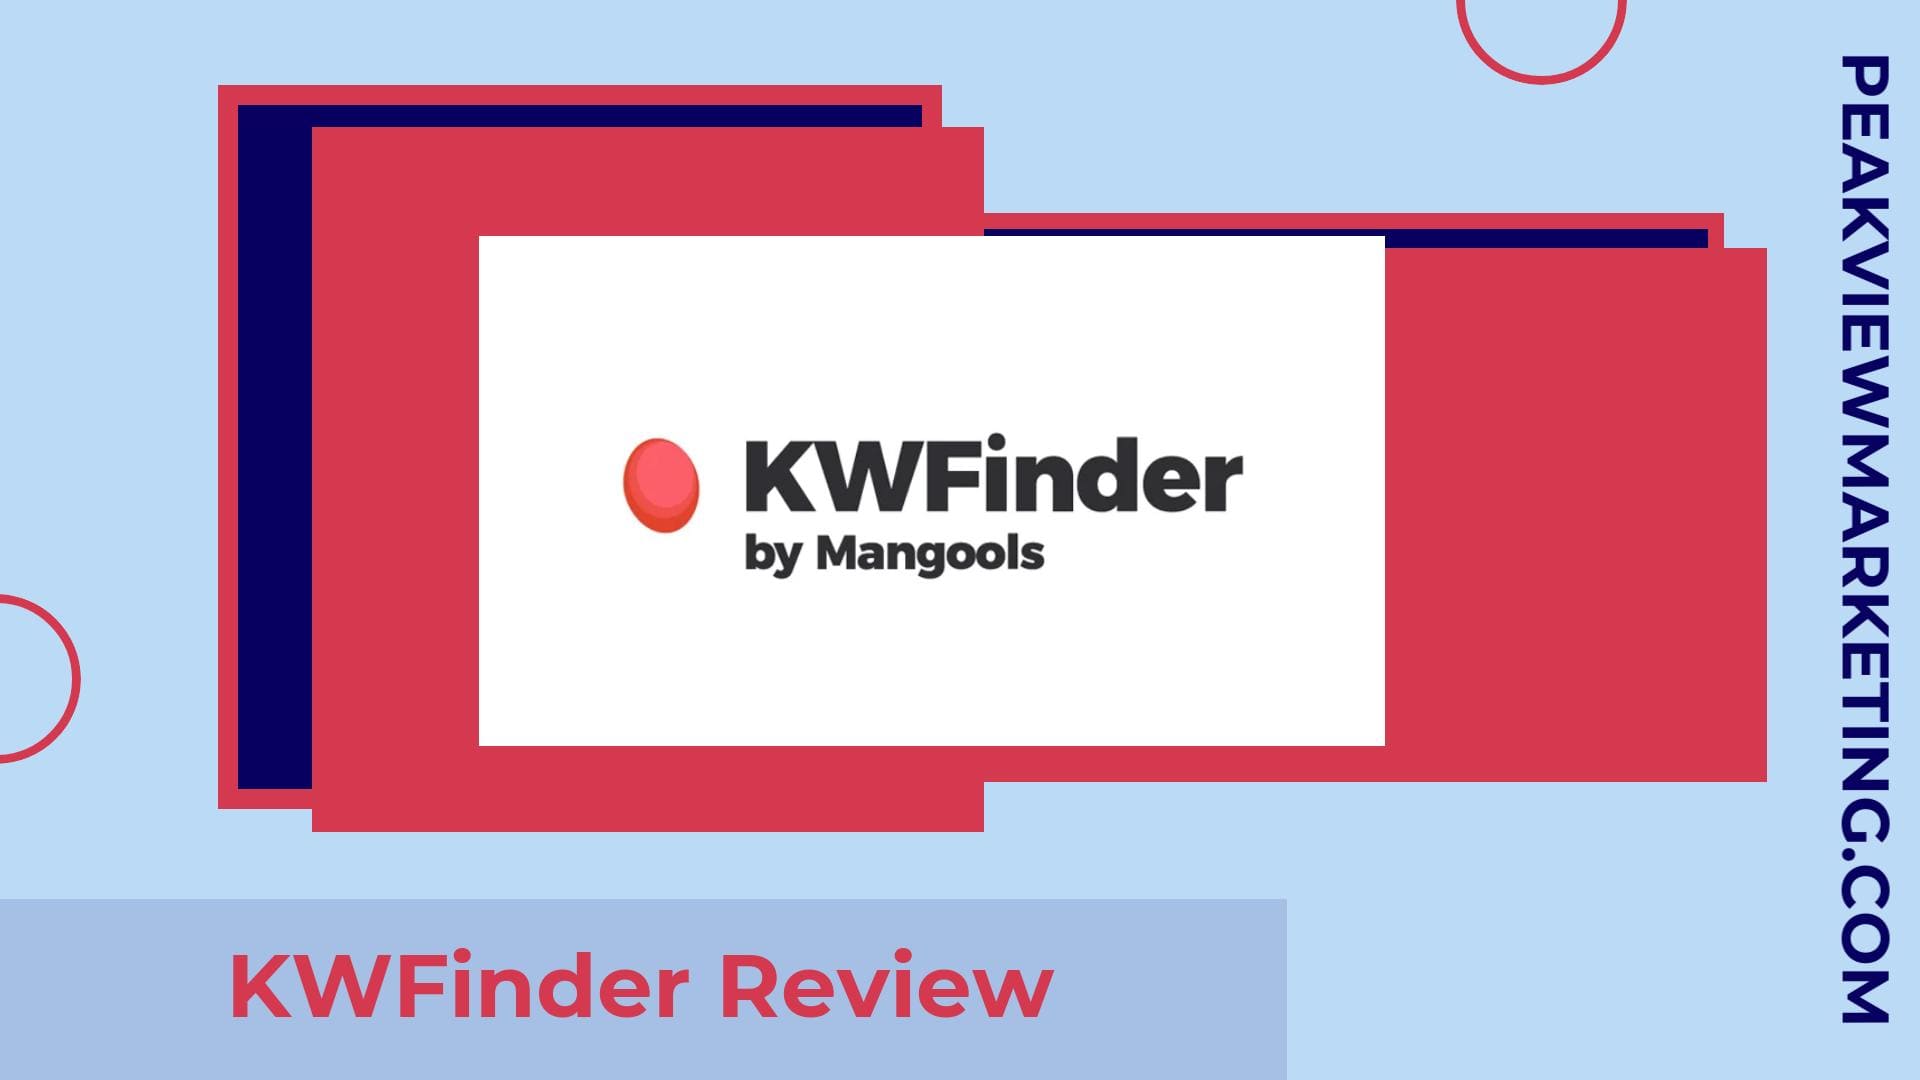 KWFinder Review Image